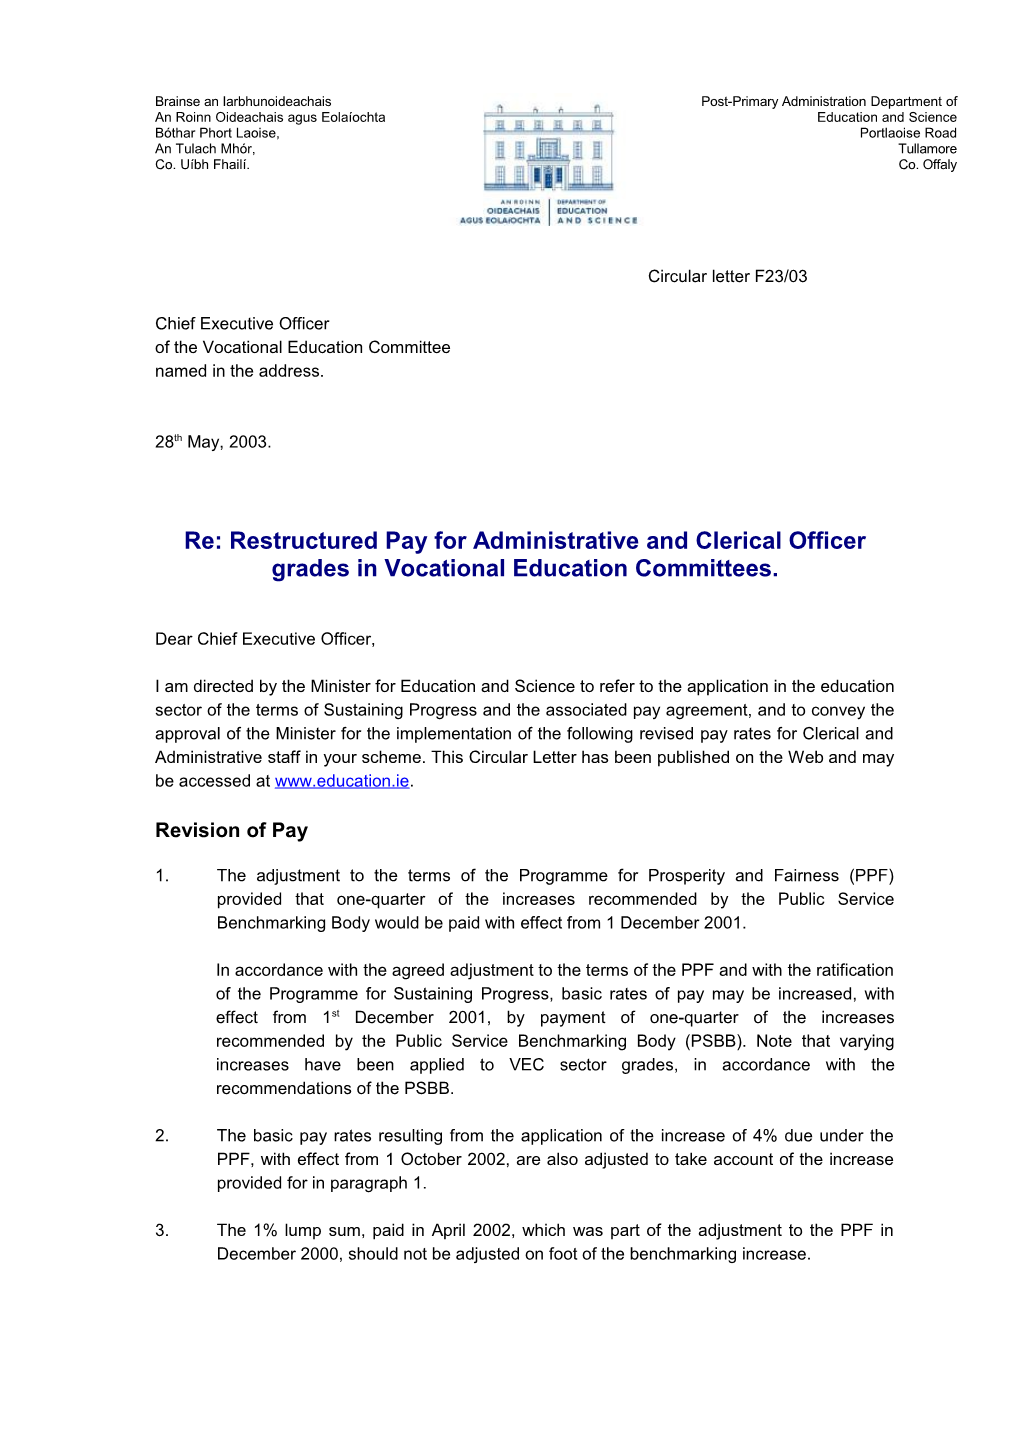 Post Primary Circular F23/03 Restructured Pay for Administrative and Clerical Officer Grades